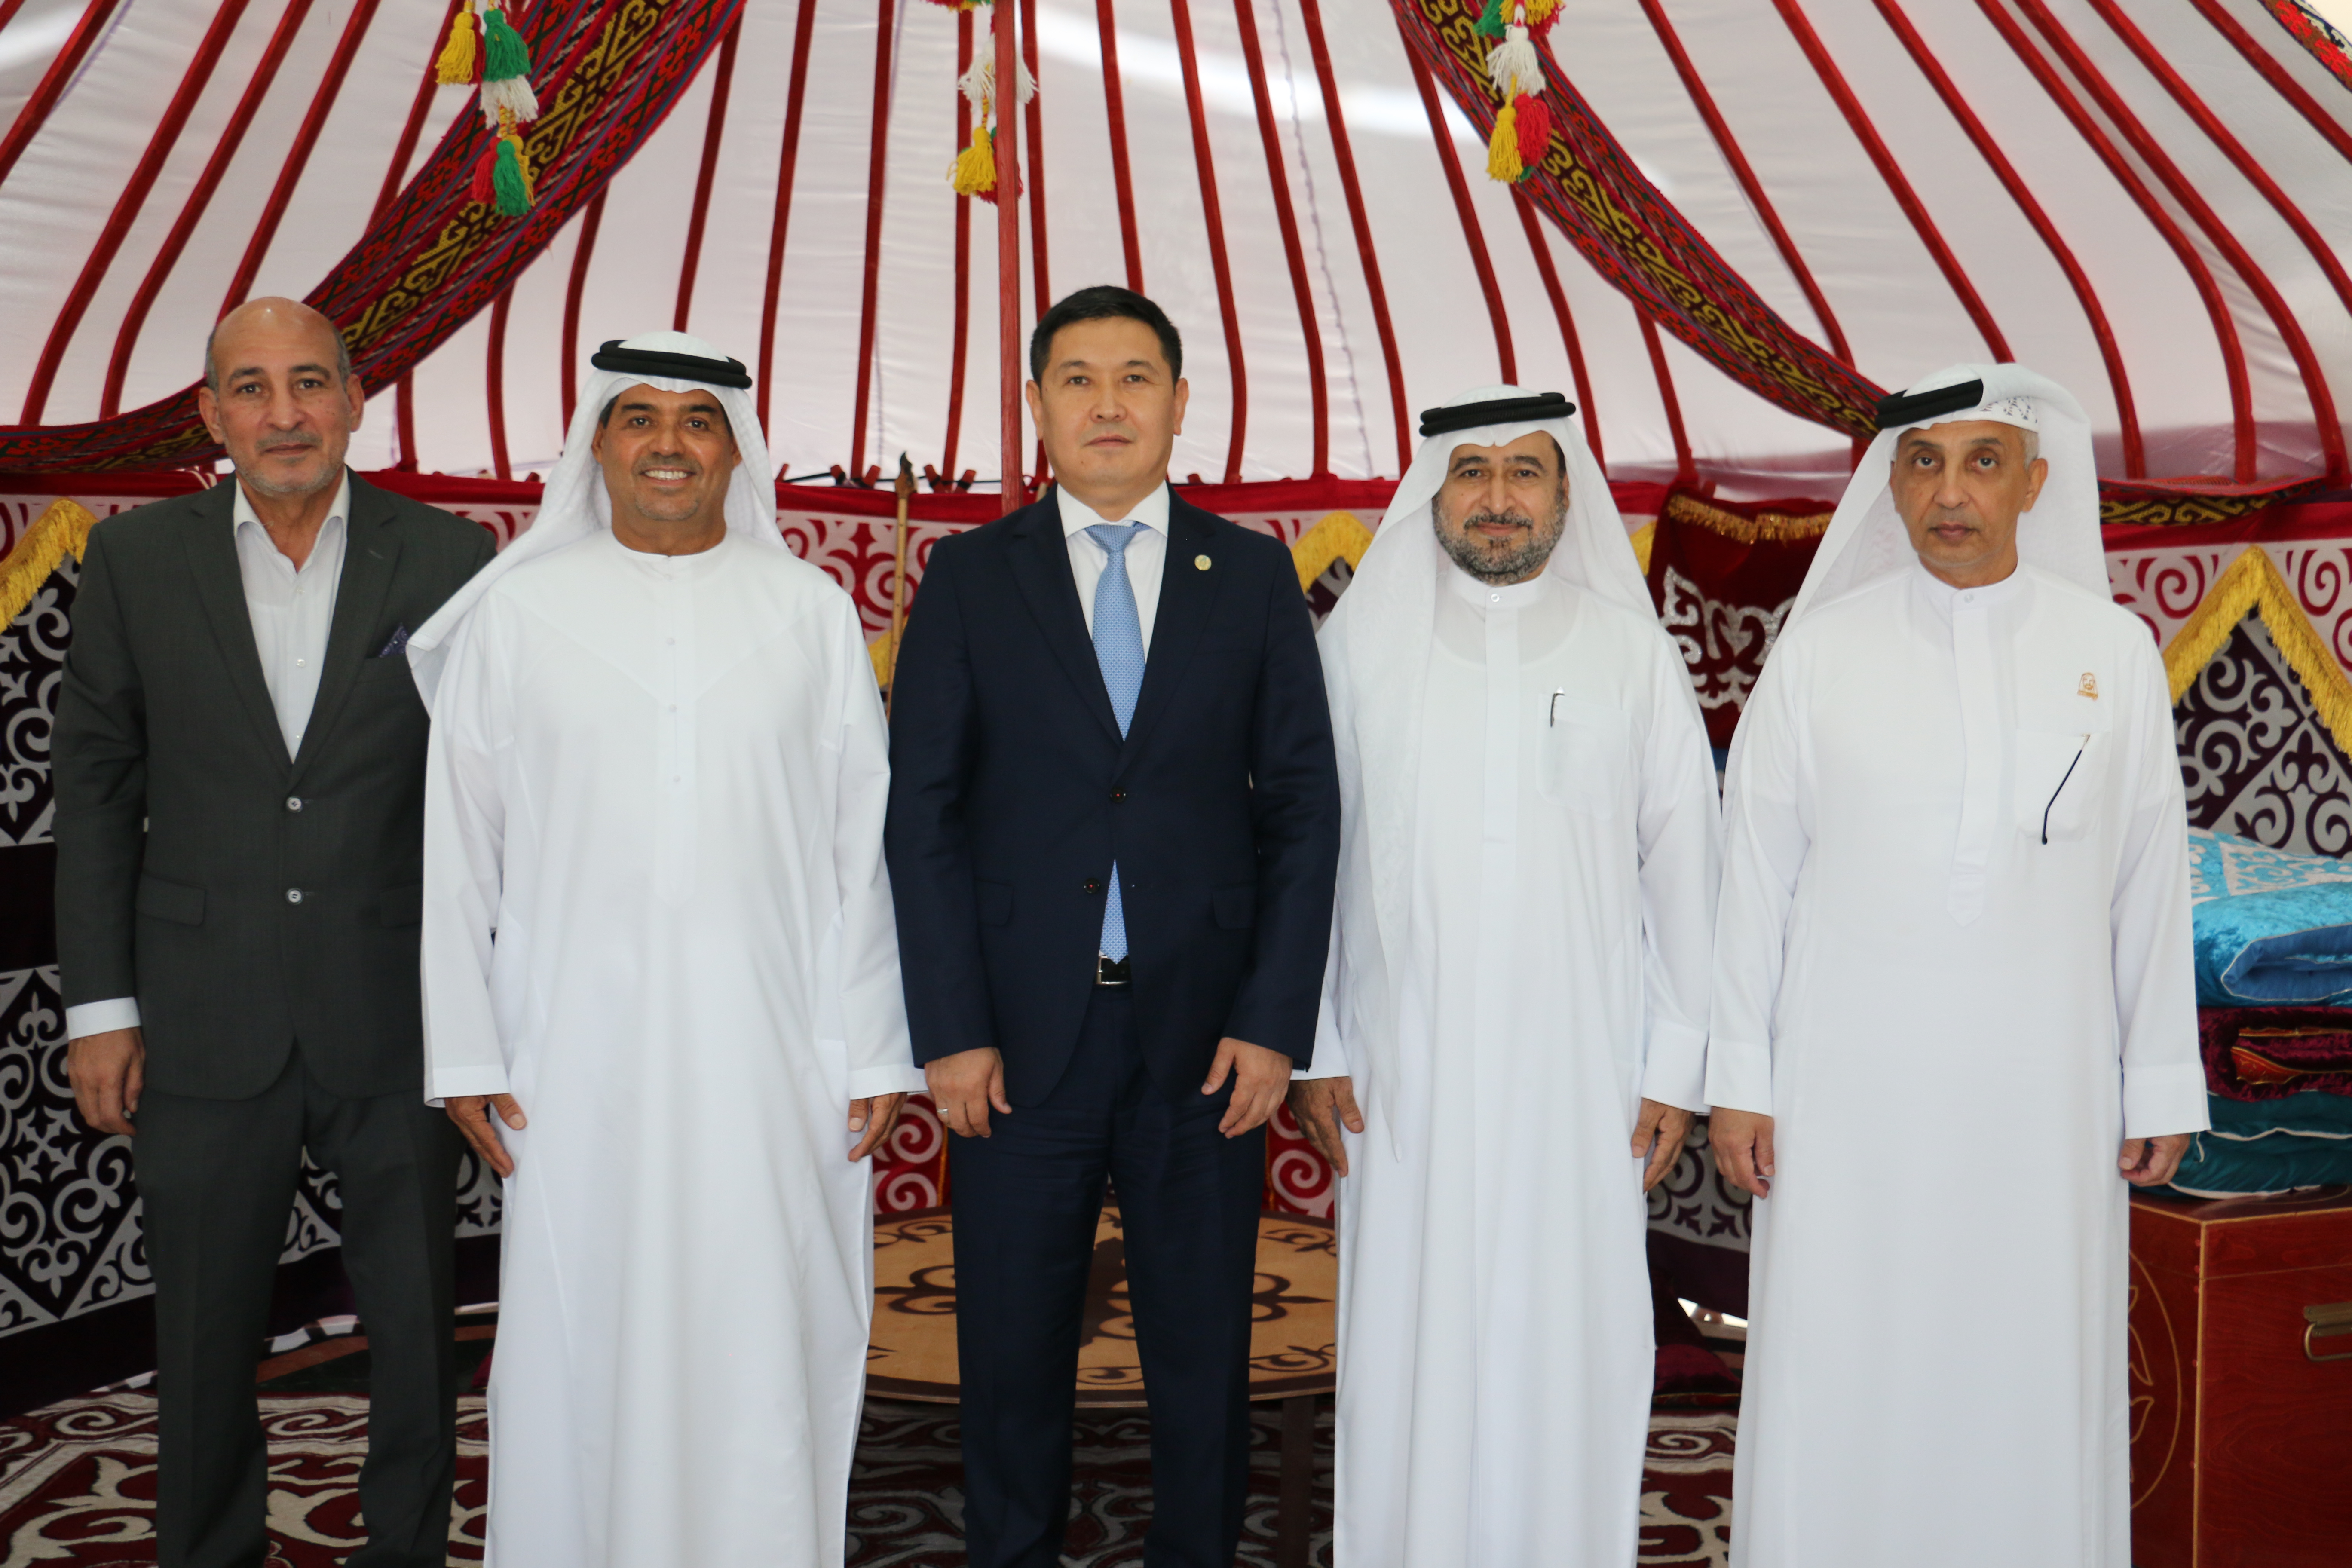 The Seventh Congress of Leaders of World and Traditional Religions was discussed in Abu Dhabi